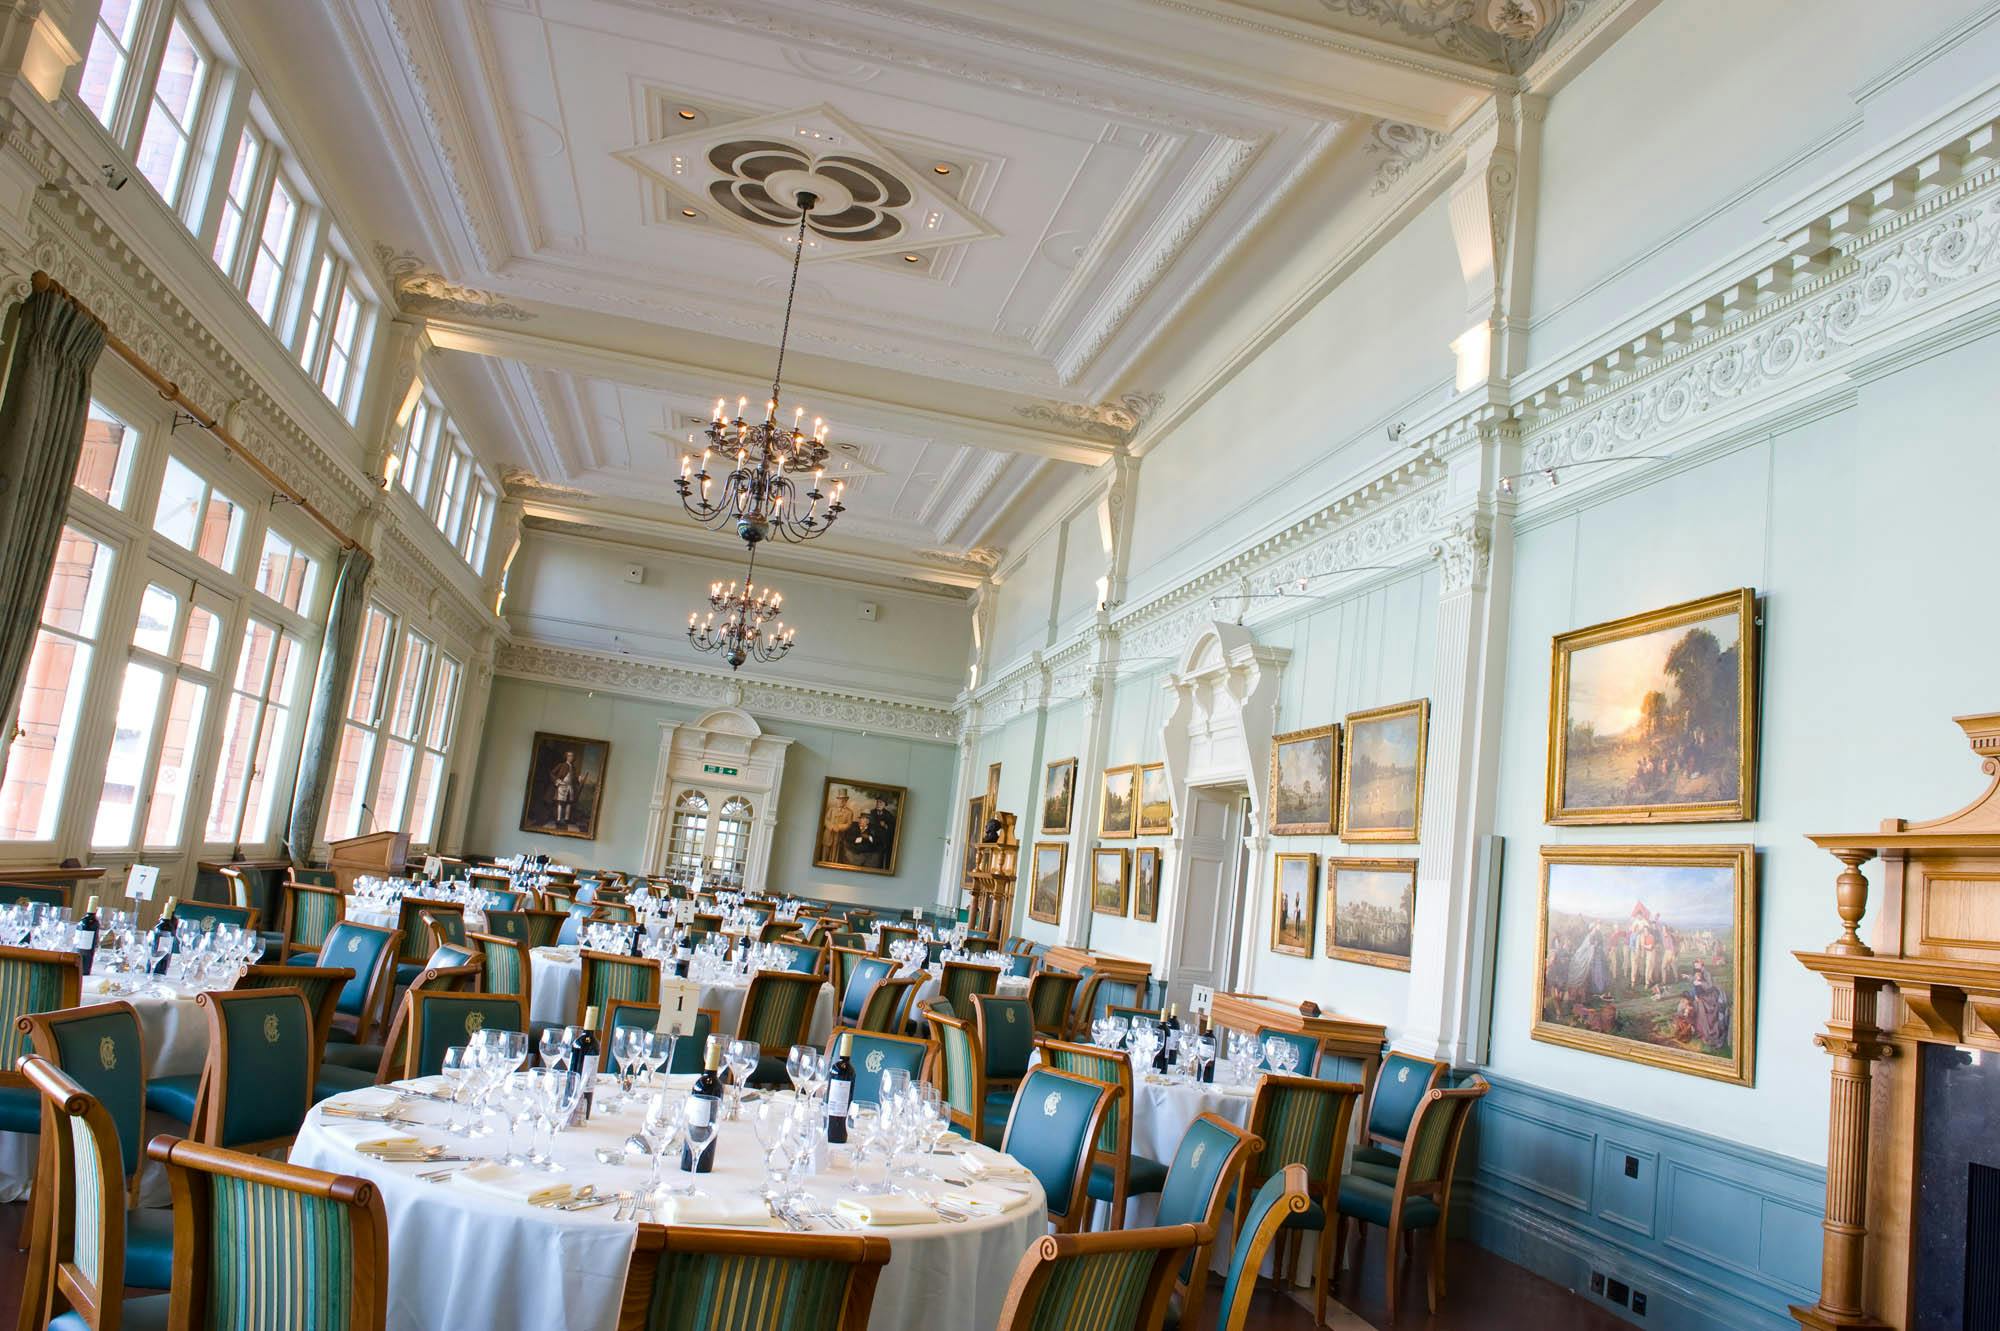 Gala Dinner Venues - Lord's Cricket Ground - Events in Long Room - Banner